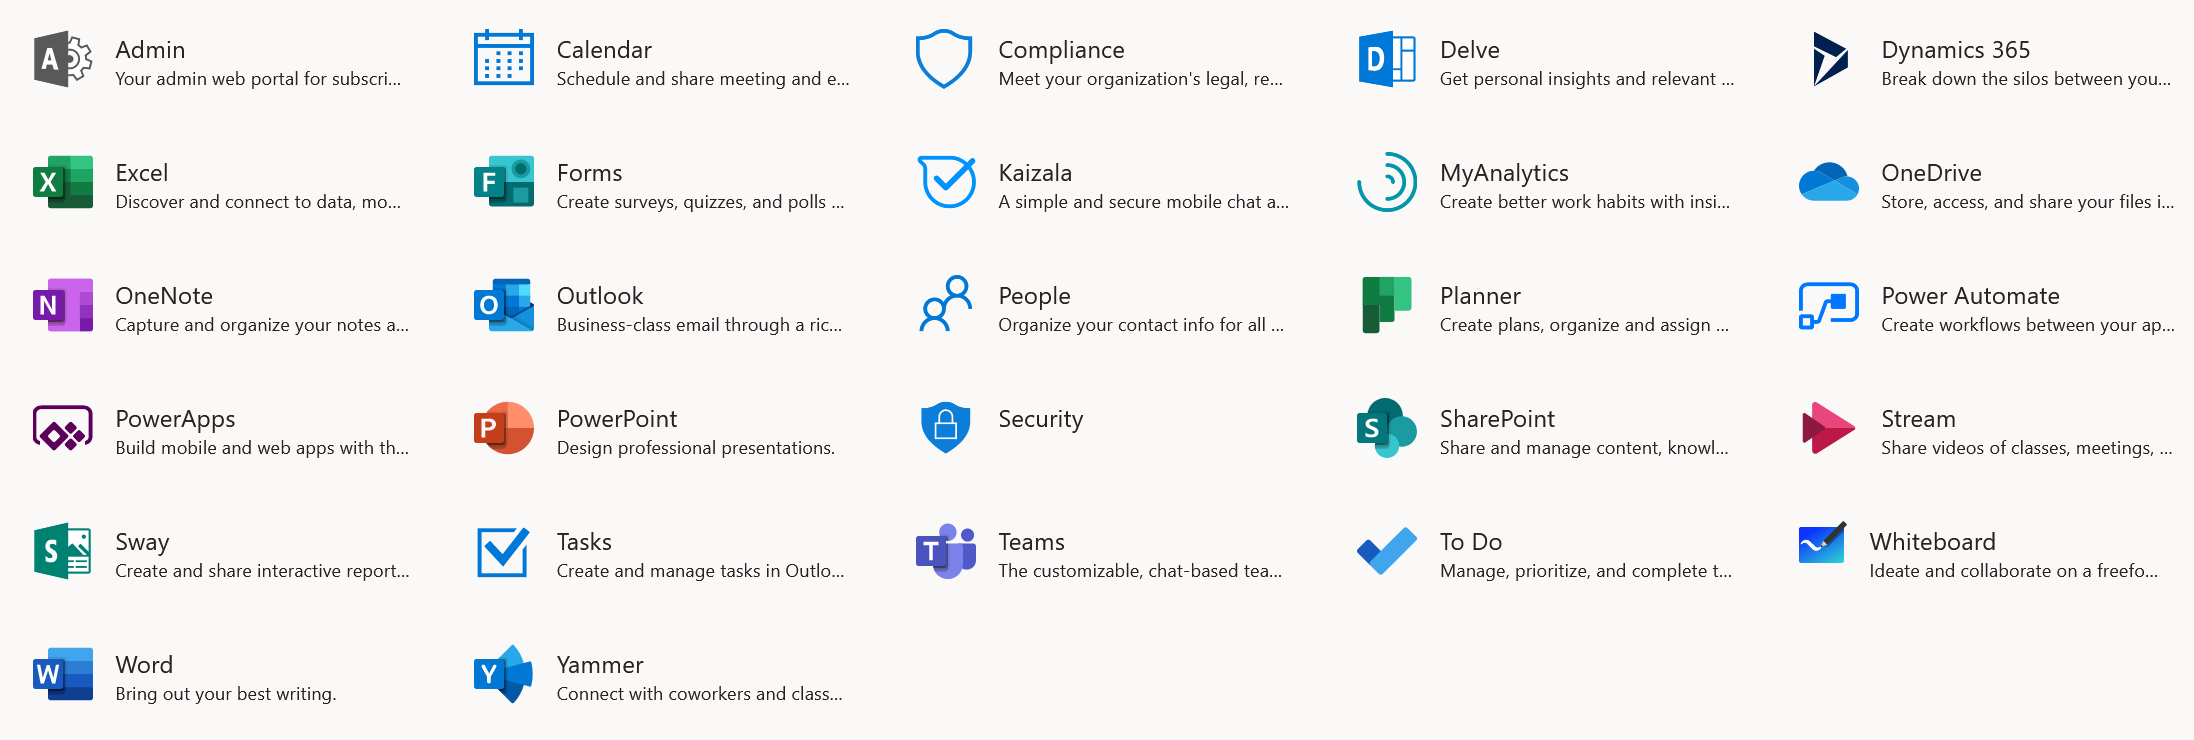 Office 365 Applications